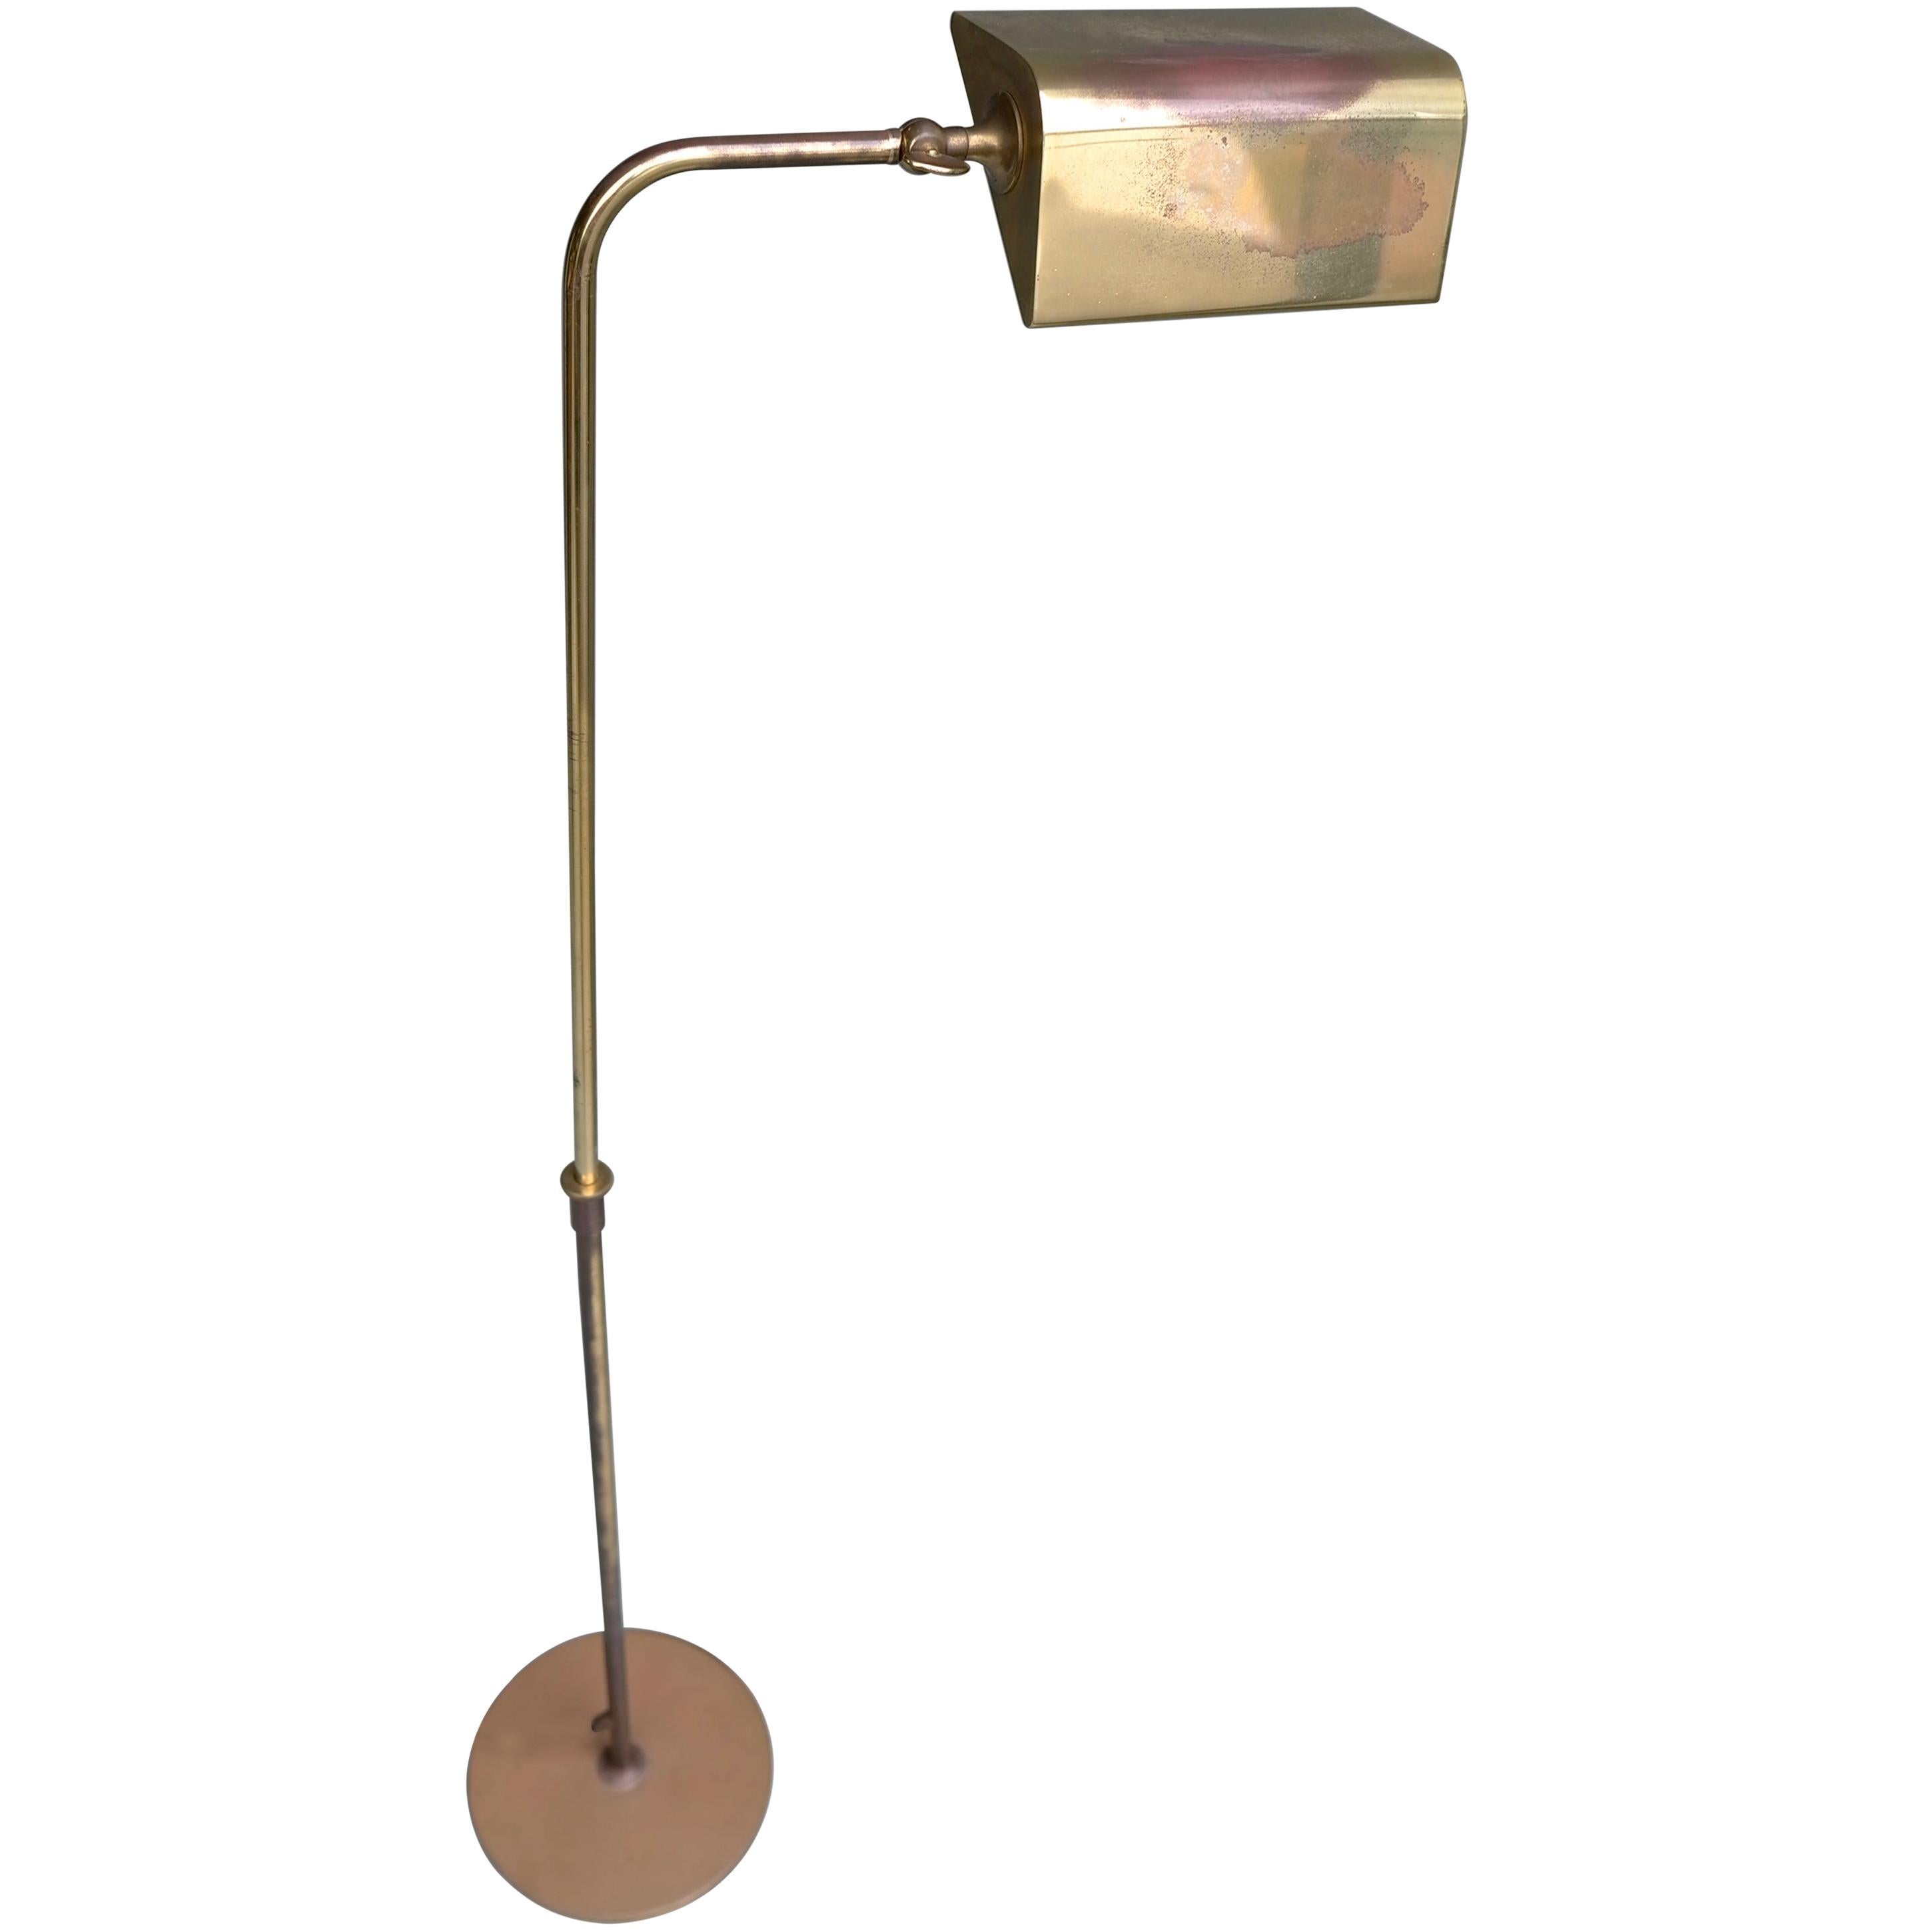 Florian Schulz Adjustable Copper and Brass Library Floor Lamp with Patina For Sale